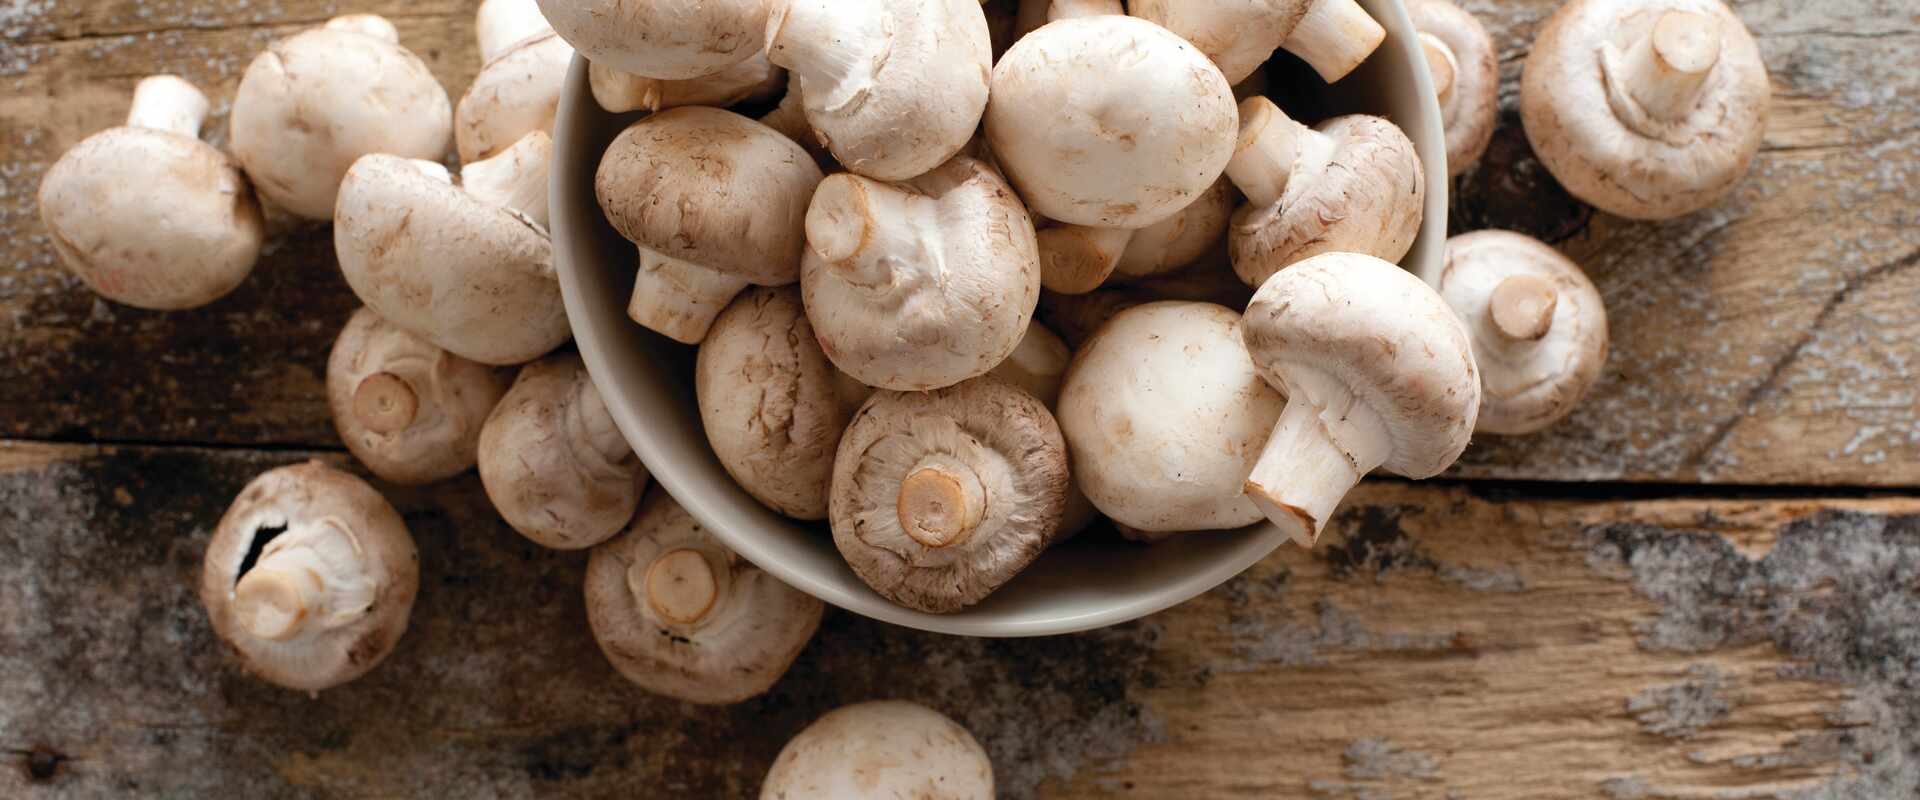 Image of mushrooms in a bowl